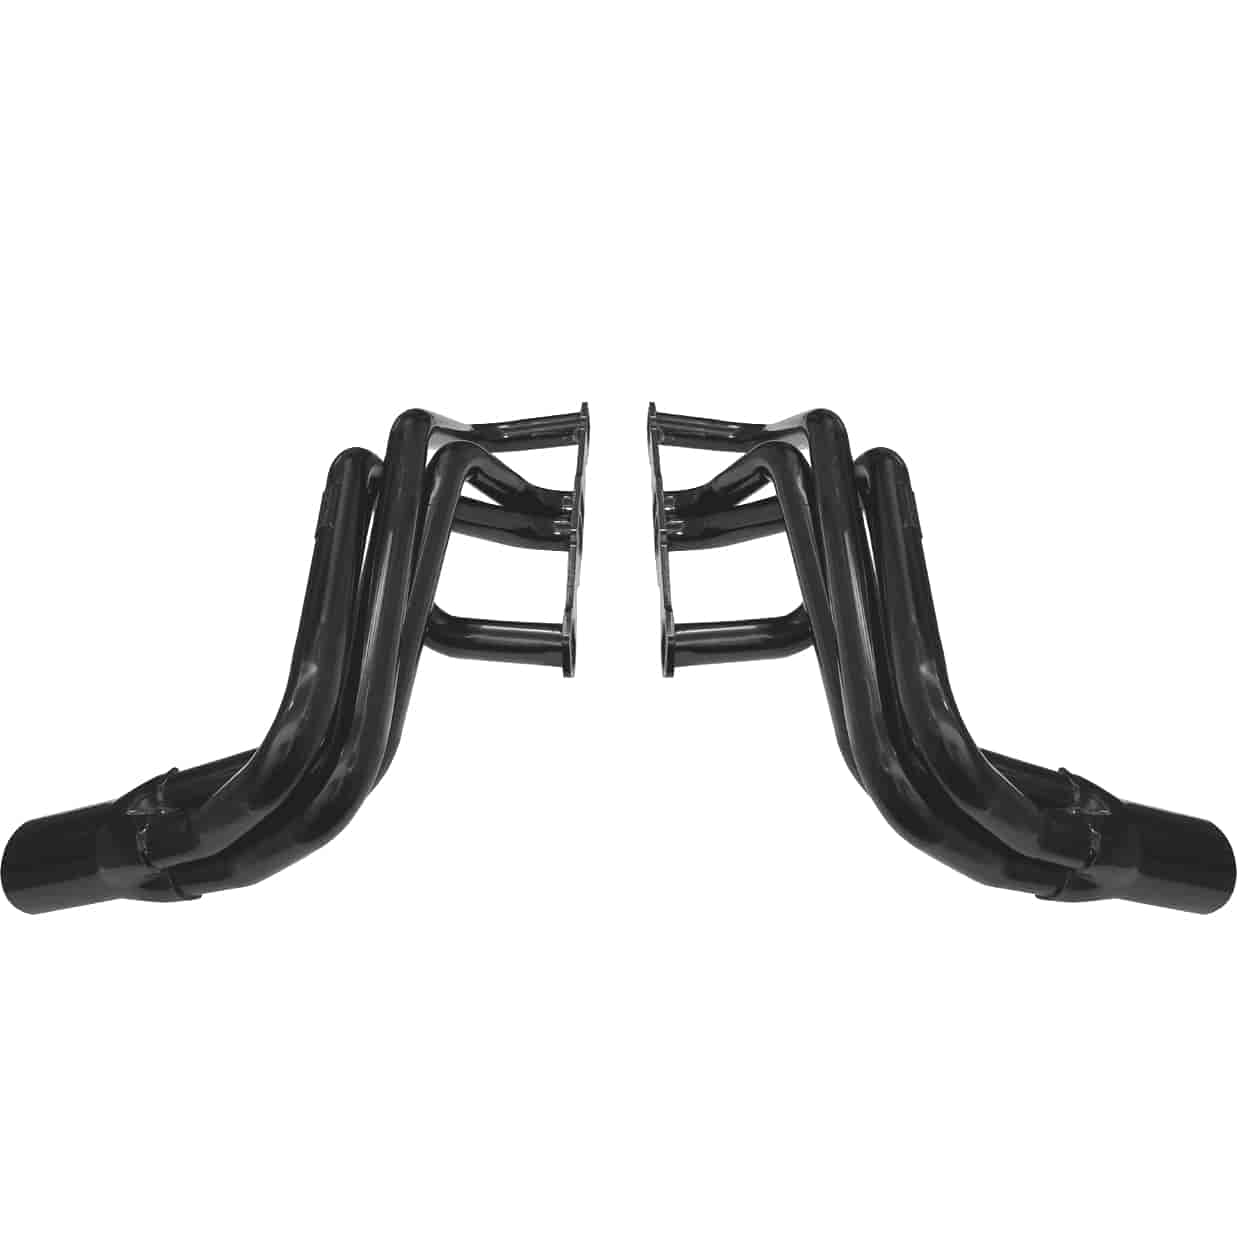 S-10 Truck Forward Exit V8 Conversion Headers - Small Block Chevy - Spread Ports